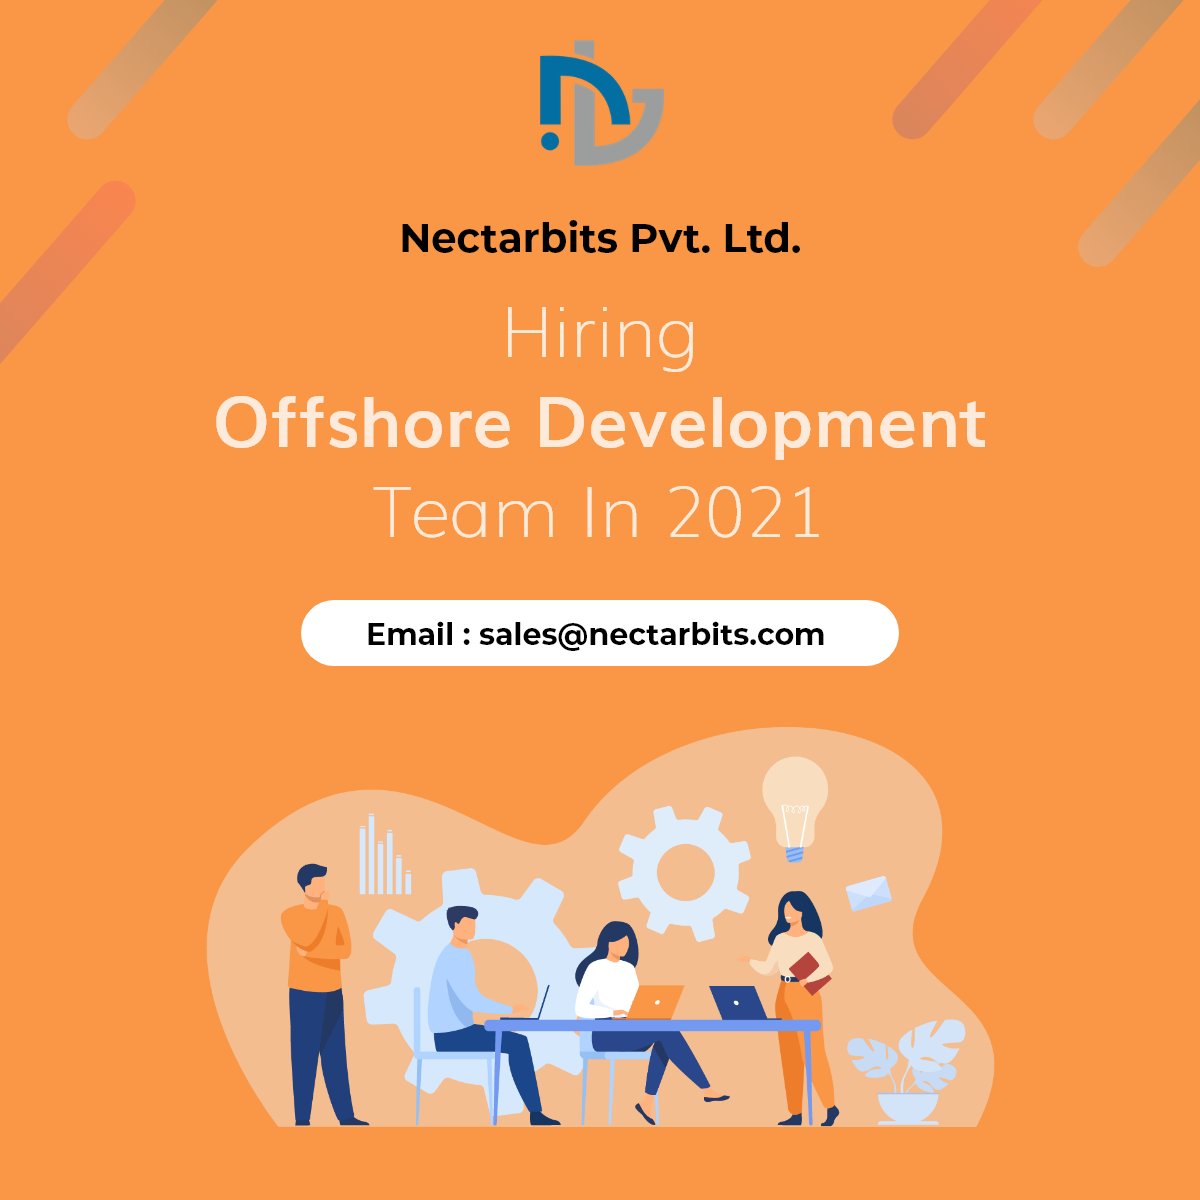 Hiring Offshore Development Team In 2021- Know The Benefits, Process, And Things To Consider
buff.ly/3jXR50t

#hiredeveloper #hireoffshoredeveloper #hireagancy #hirecompany #hireappdeveloper